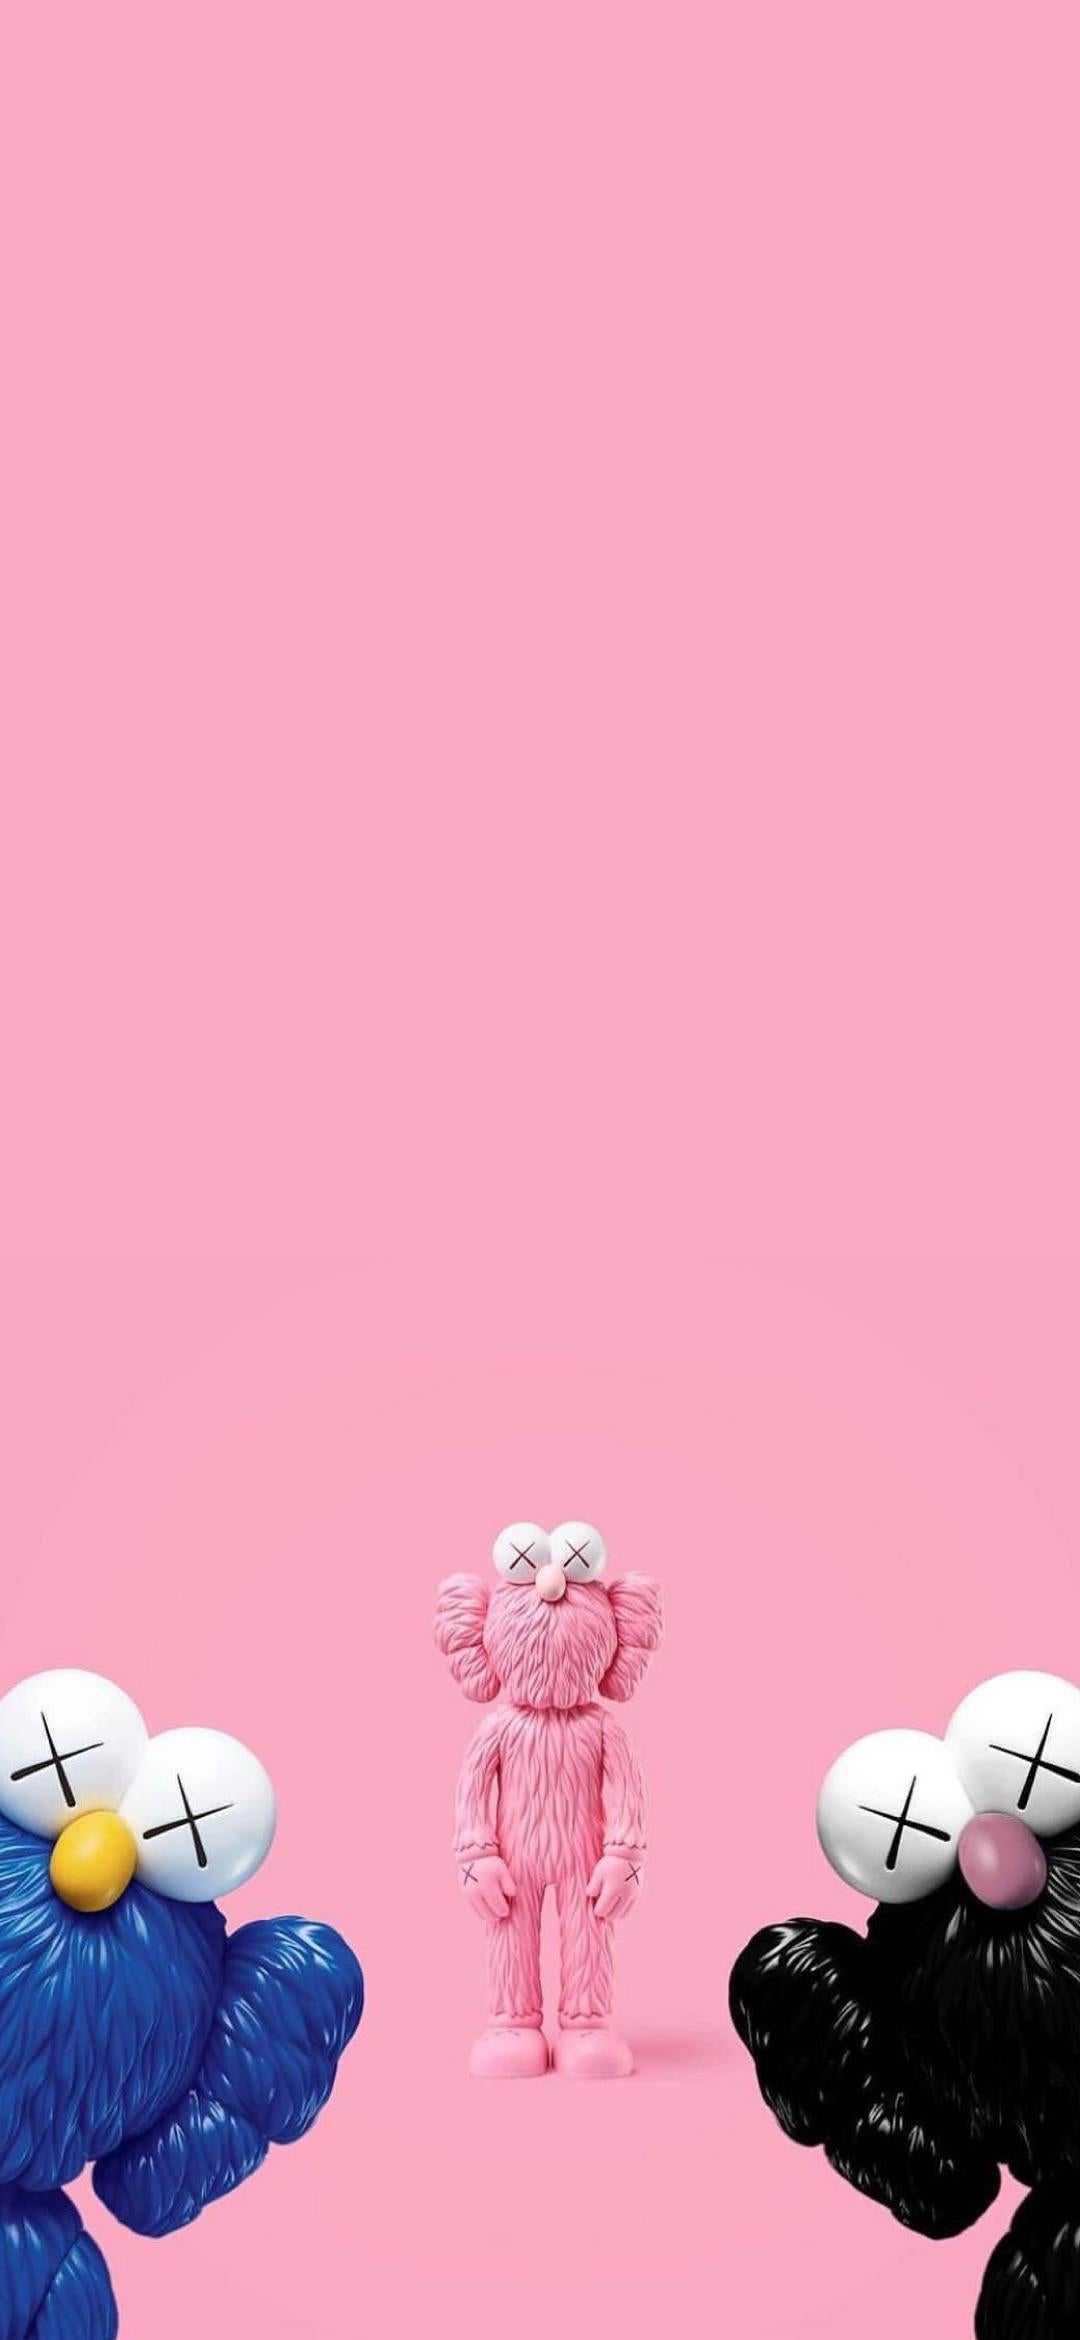 Kaws Background Discover more American, Brian Donnelly, Comic, Figurative Characters, Kaws wallpape. iPhone wallpaper girly, Kaws iphone wallpaper, Kaws wallpaper